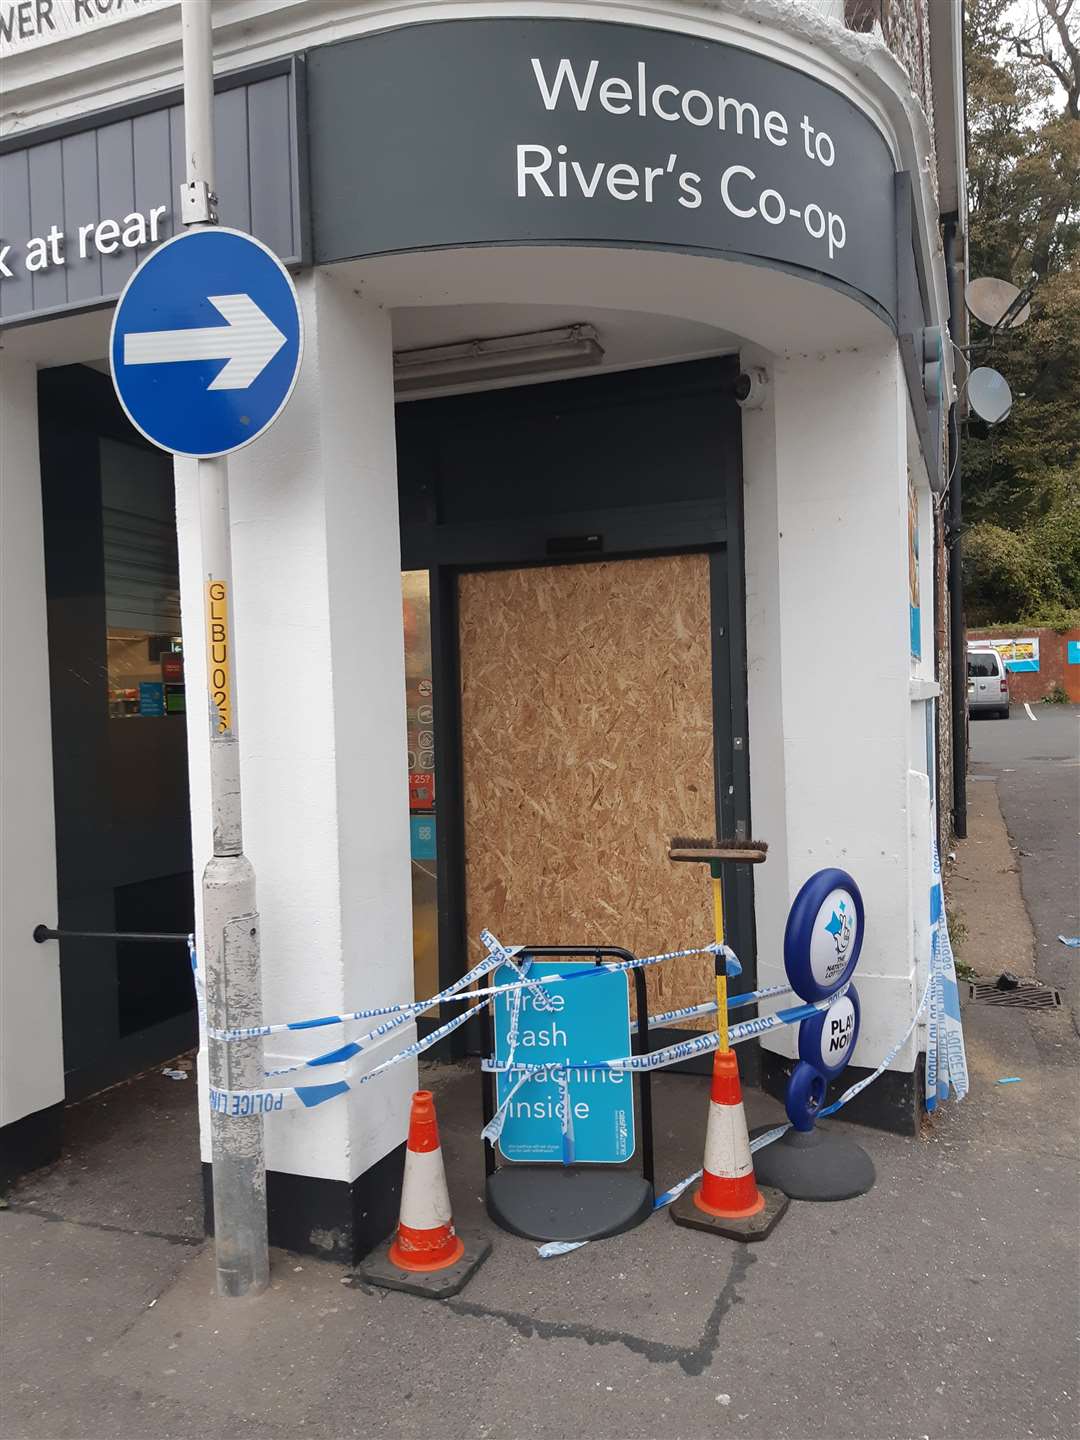 The damage to the River Co-op just after the raid